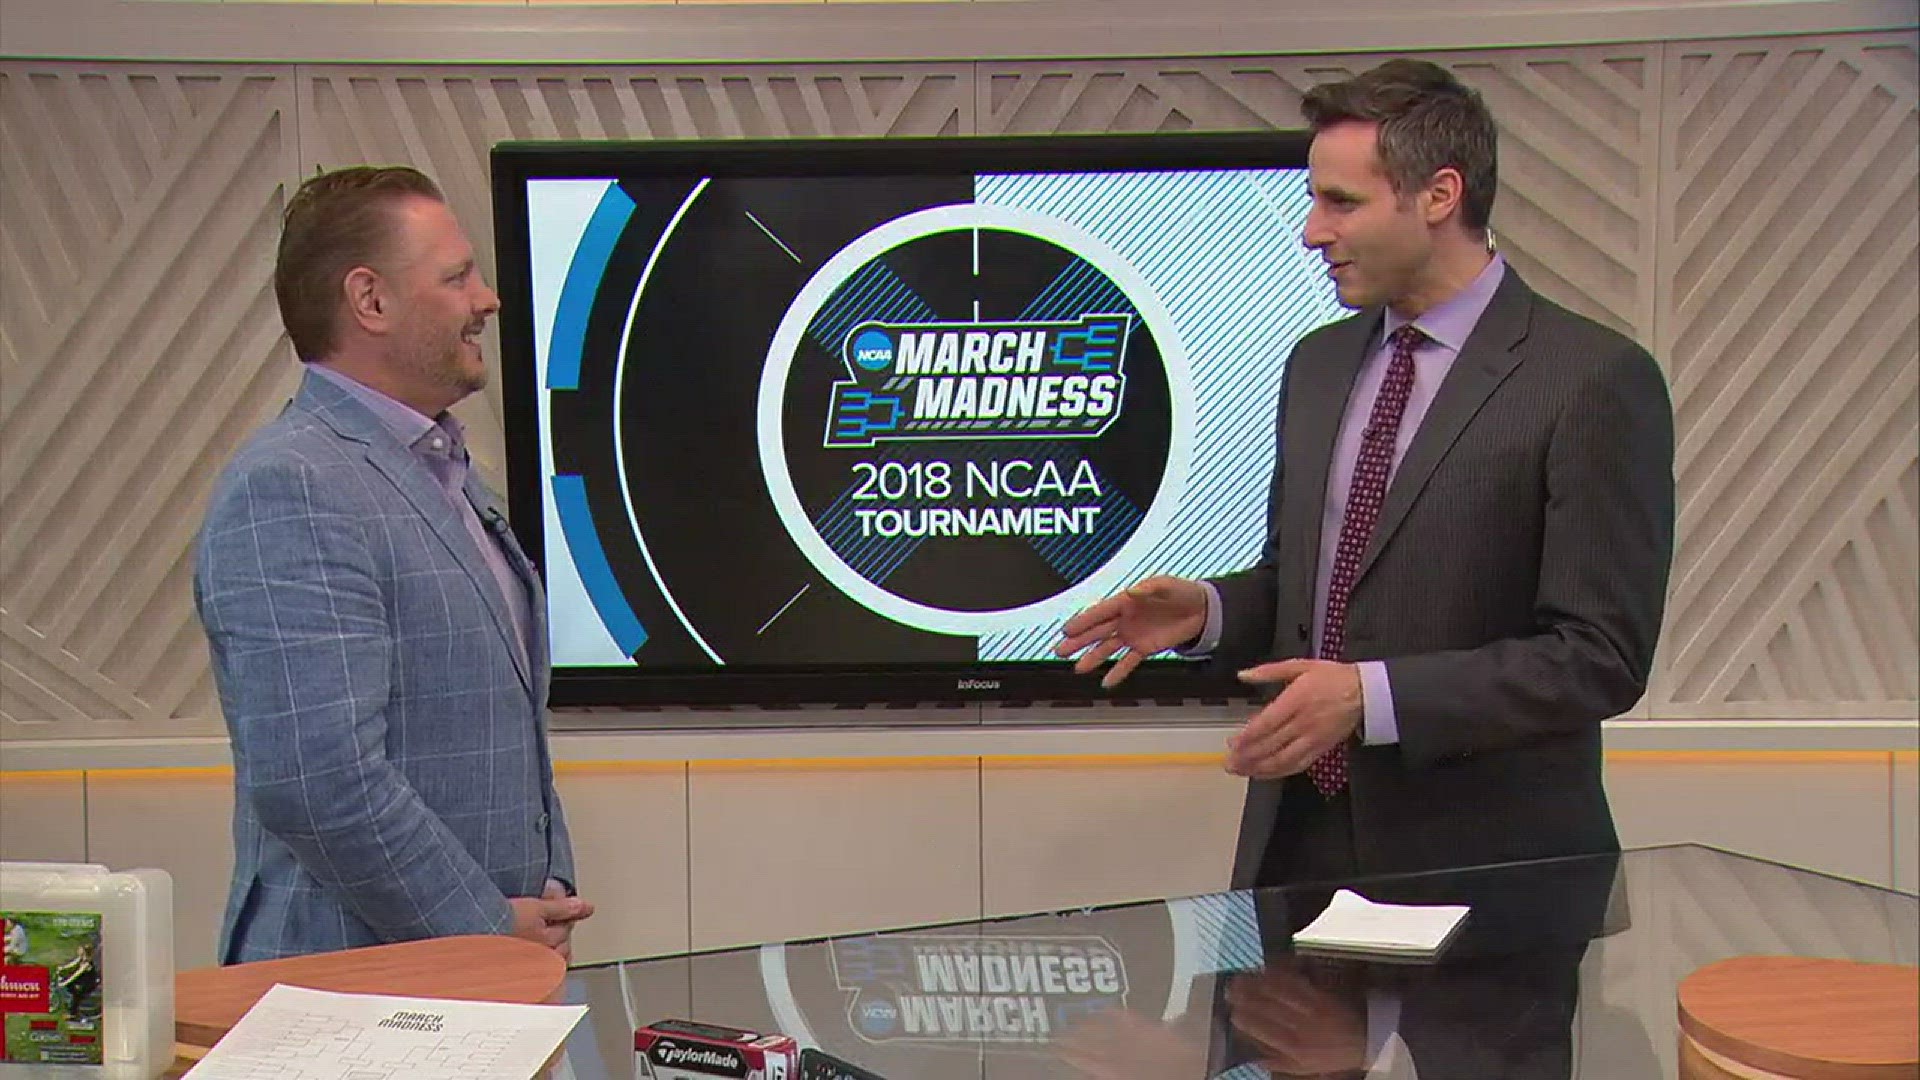 Financial professional Mike Kojonen, owner of Principal Preservation Services, explains how March Madness can teach us valuable lessons about saving and budgeting. http://kare11.tv/2pfLhna